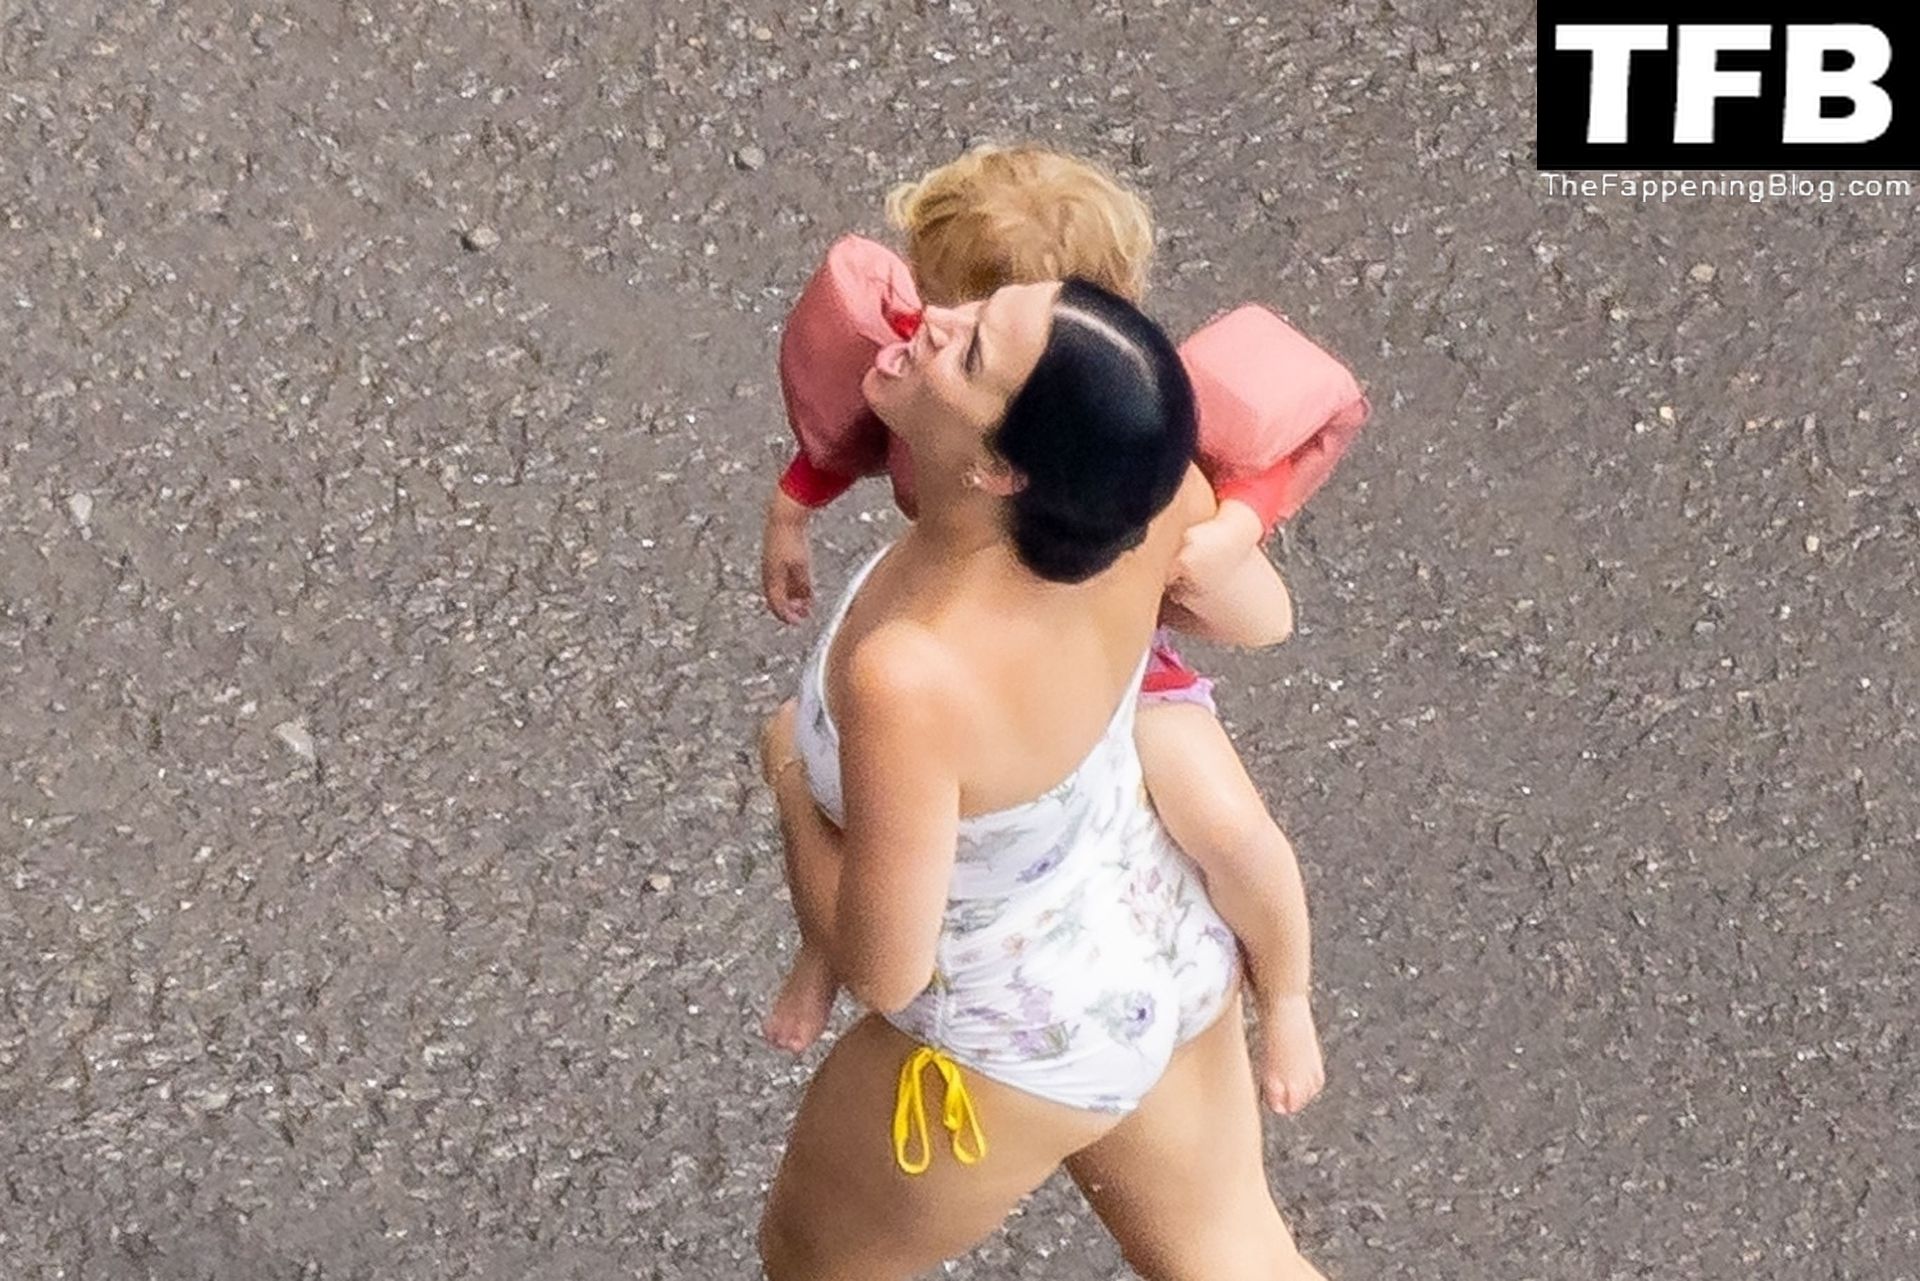 Katy Perry Rocks a Strapless Swimsuit While Enjoying a Beach Day with Orlan...